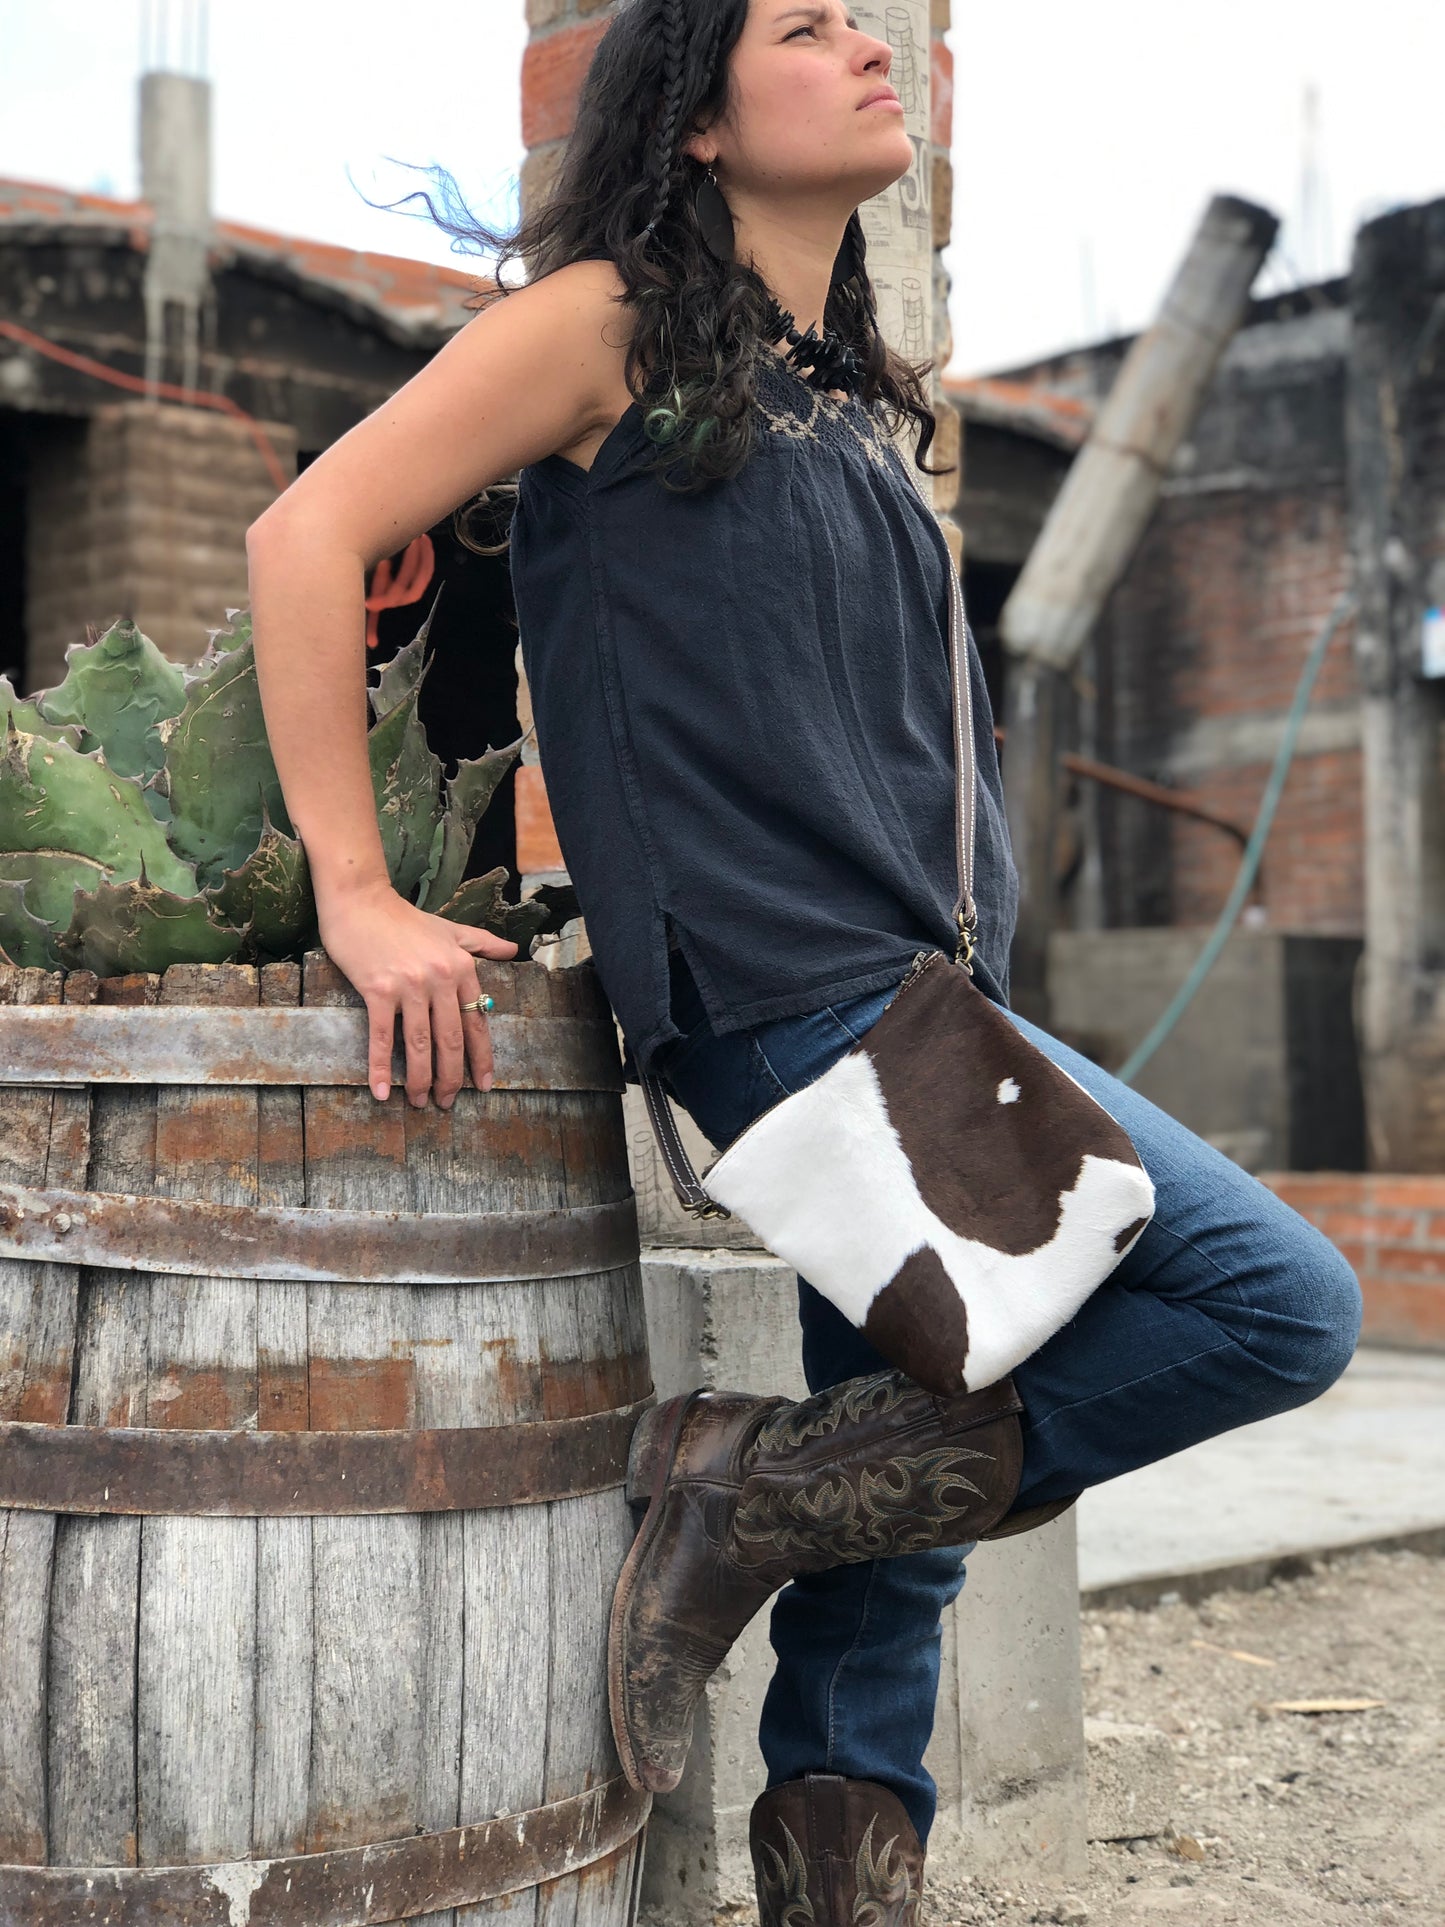 The Baja Crossbody Bag - Cowhide and leather